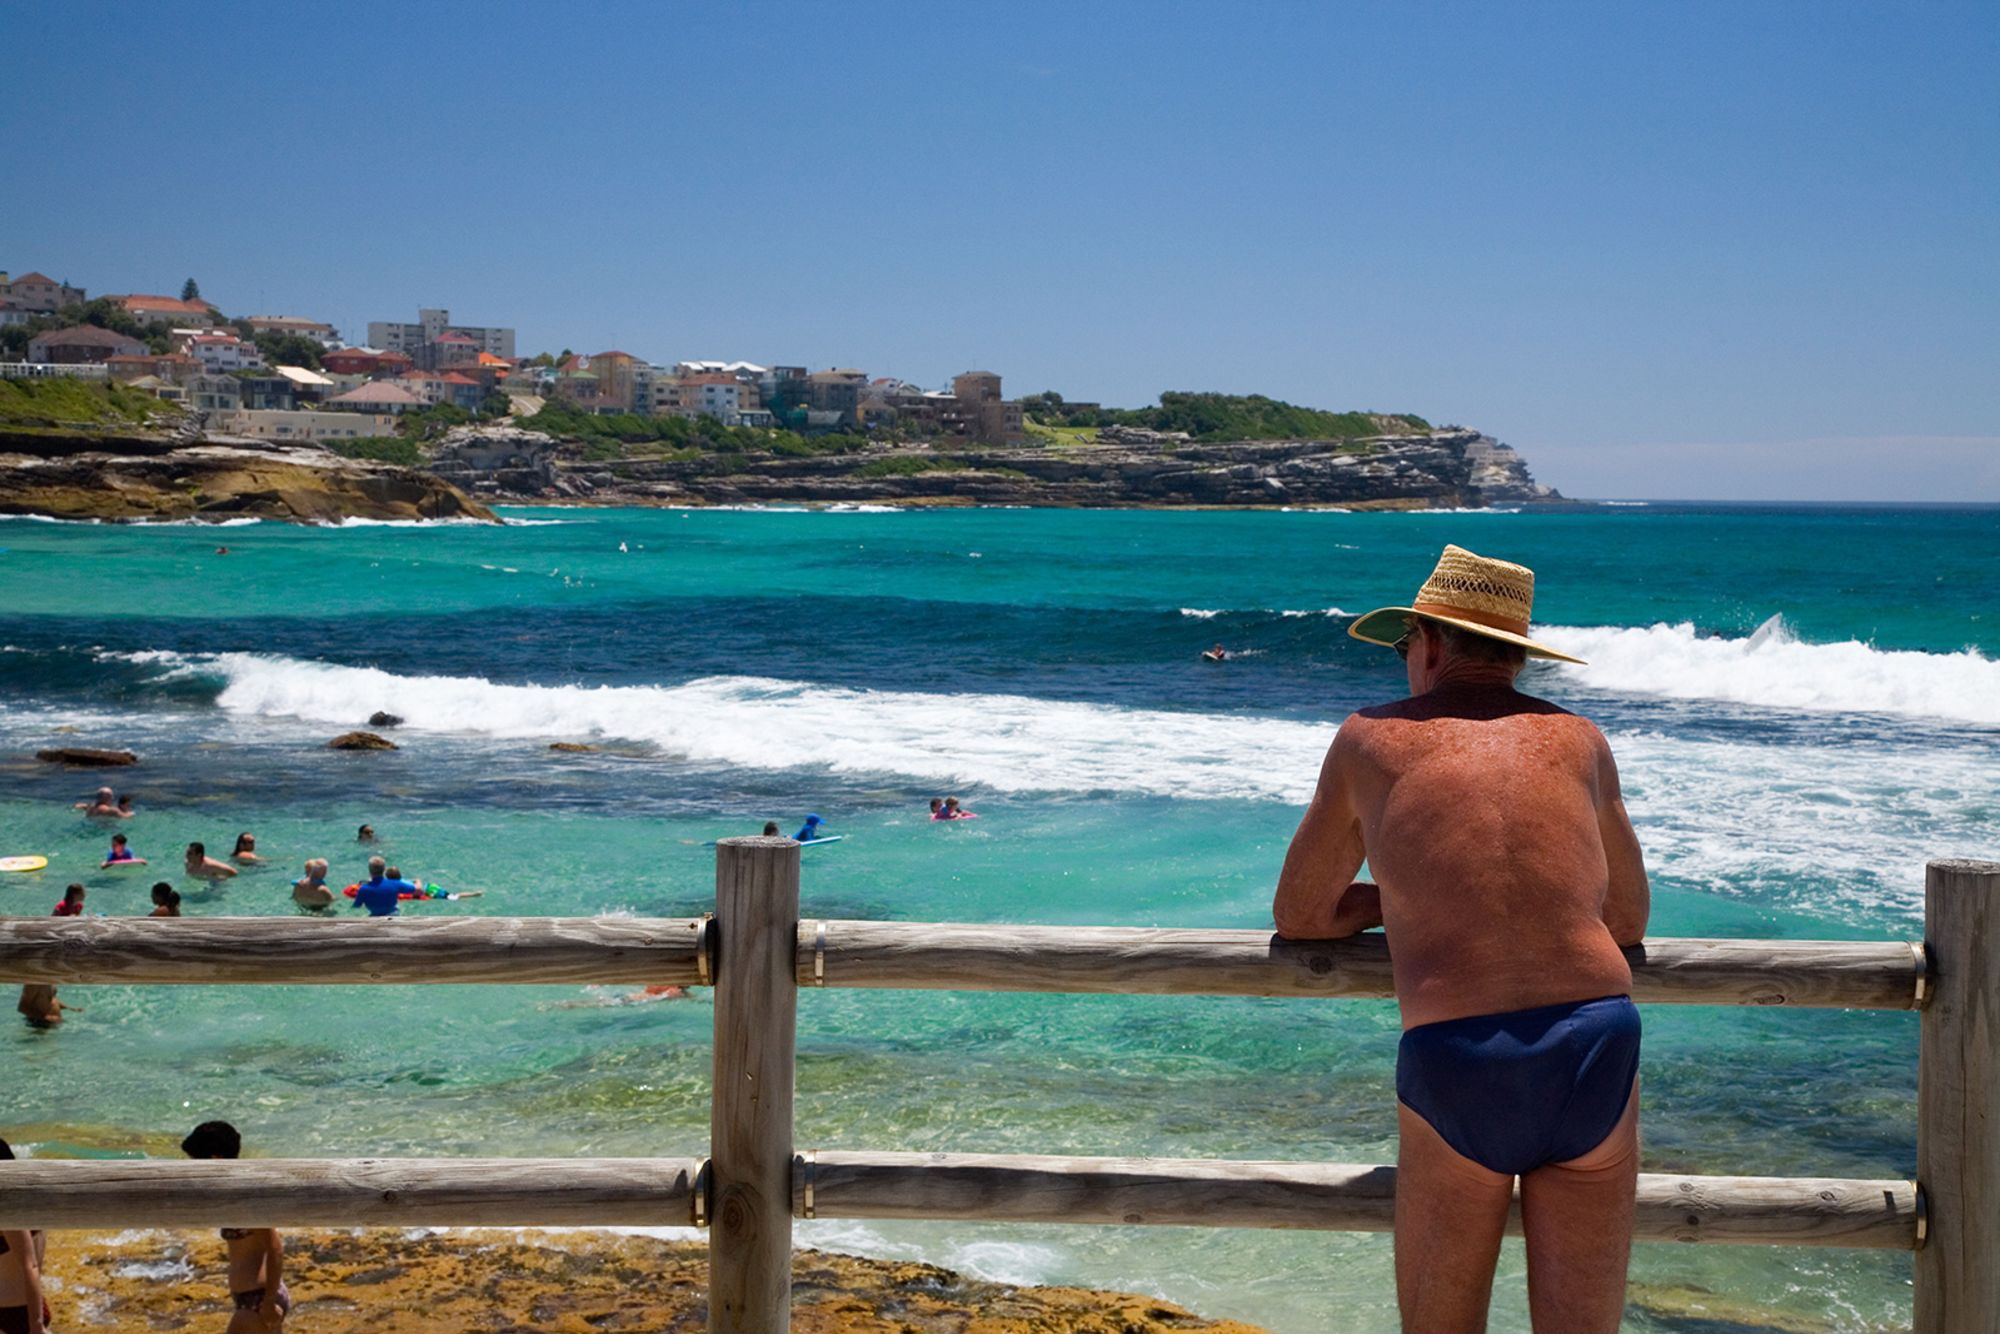 C99B64 A man looks out over the sea at Bronte Beach. Sydney, New South Wales, Australia